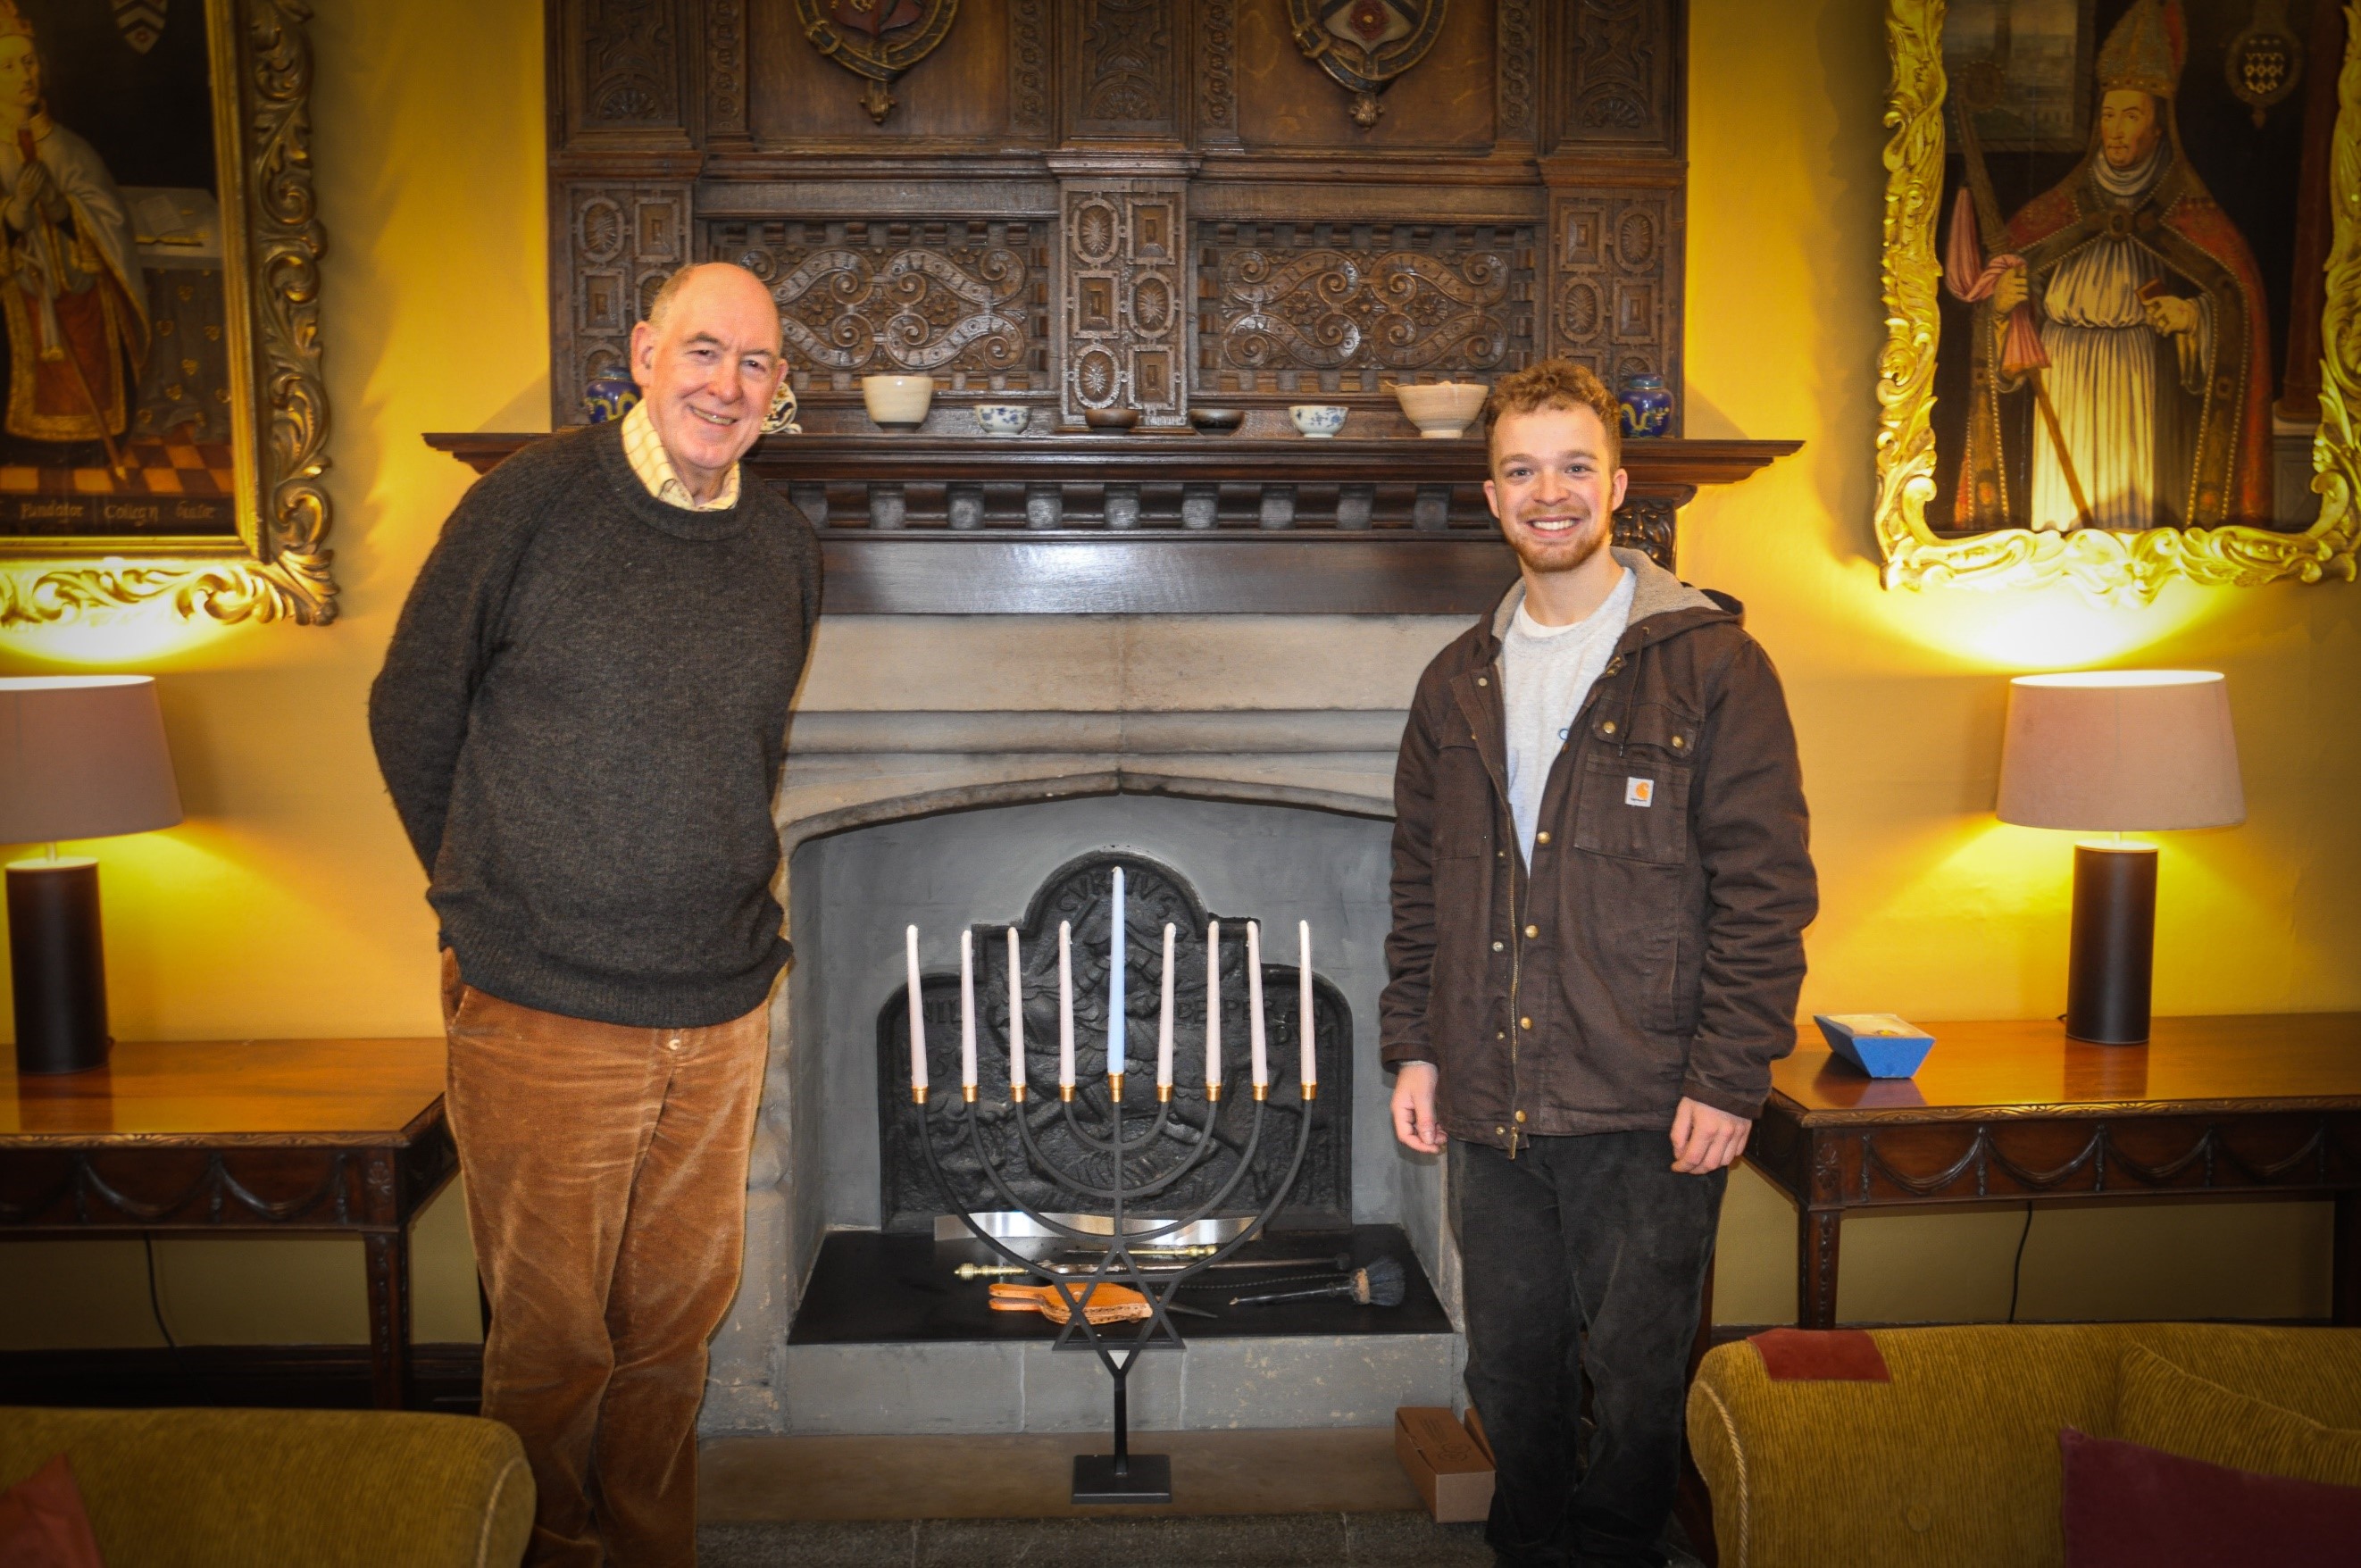 The Warden and Charlie (Co-President of New College JSoc) stand in the Warden's lodgings to inspect the new menorah